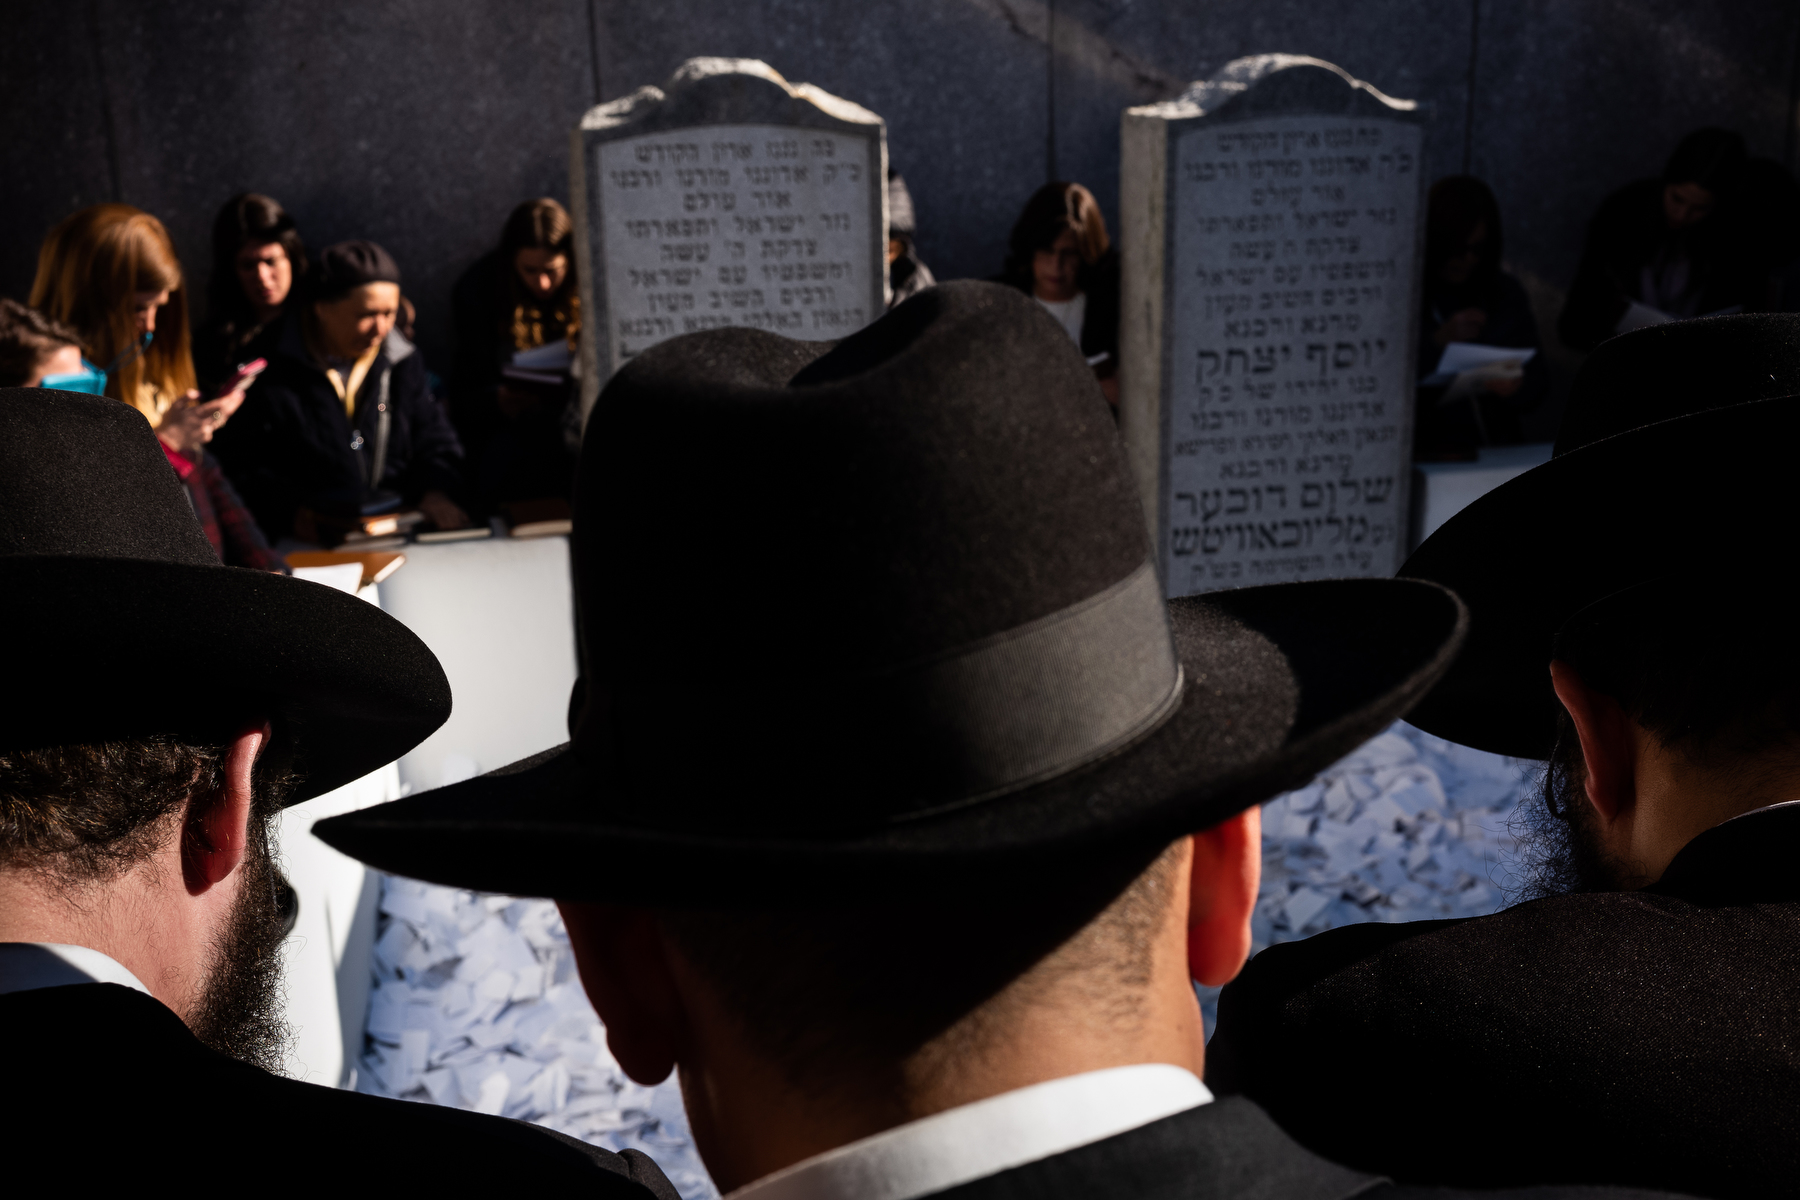  Chabad-Lubavitch rabbis and others gather to pray at the Ohel, the gravesite of the Lubavitcher Rebbe Menachem M. Schneerson in Queens, NY. 